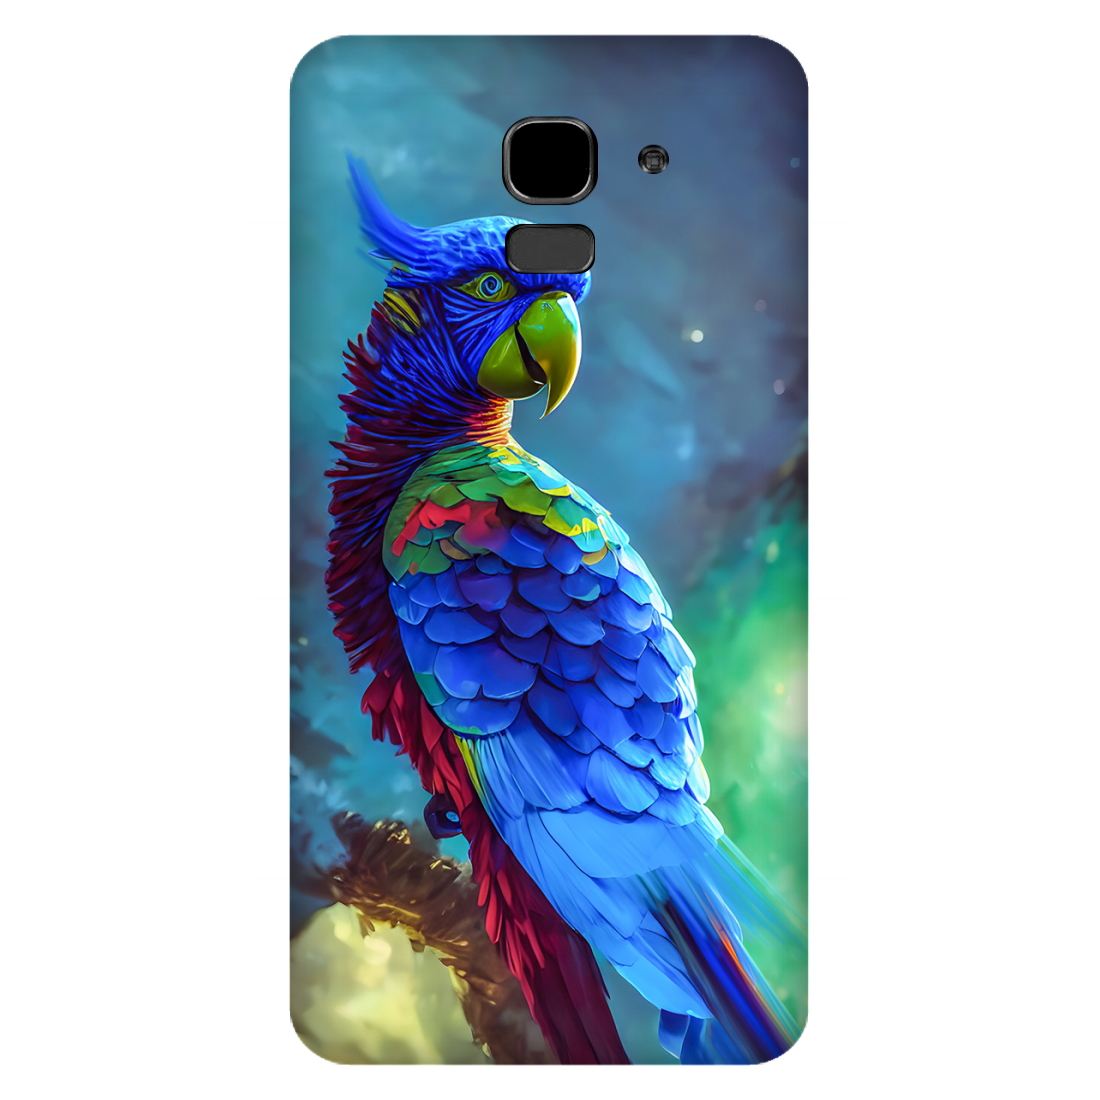 Vibrant Parrot in Dreamy Atmosphere Case Samsung Galaxy J6